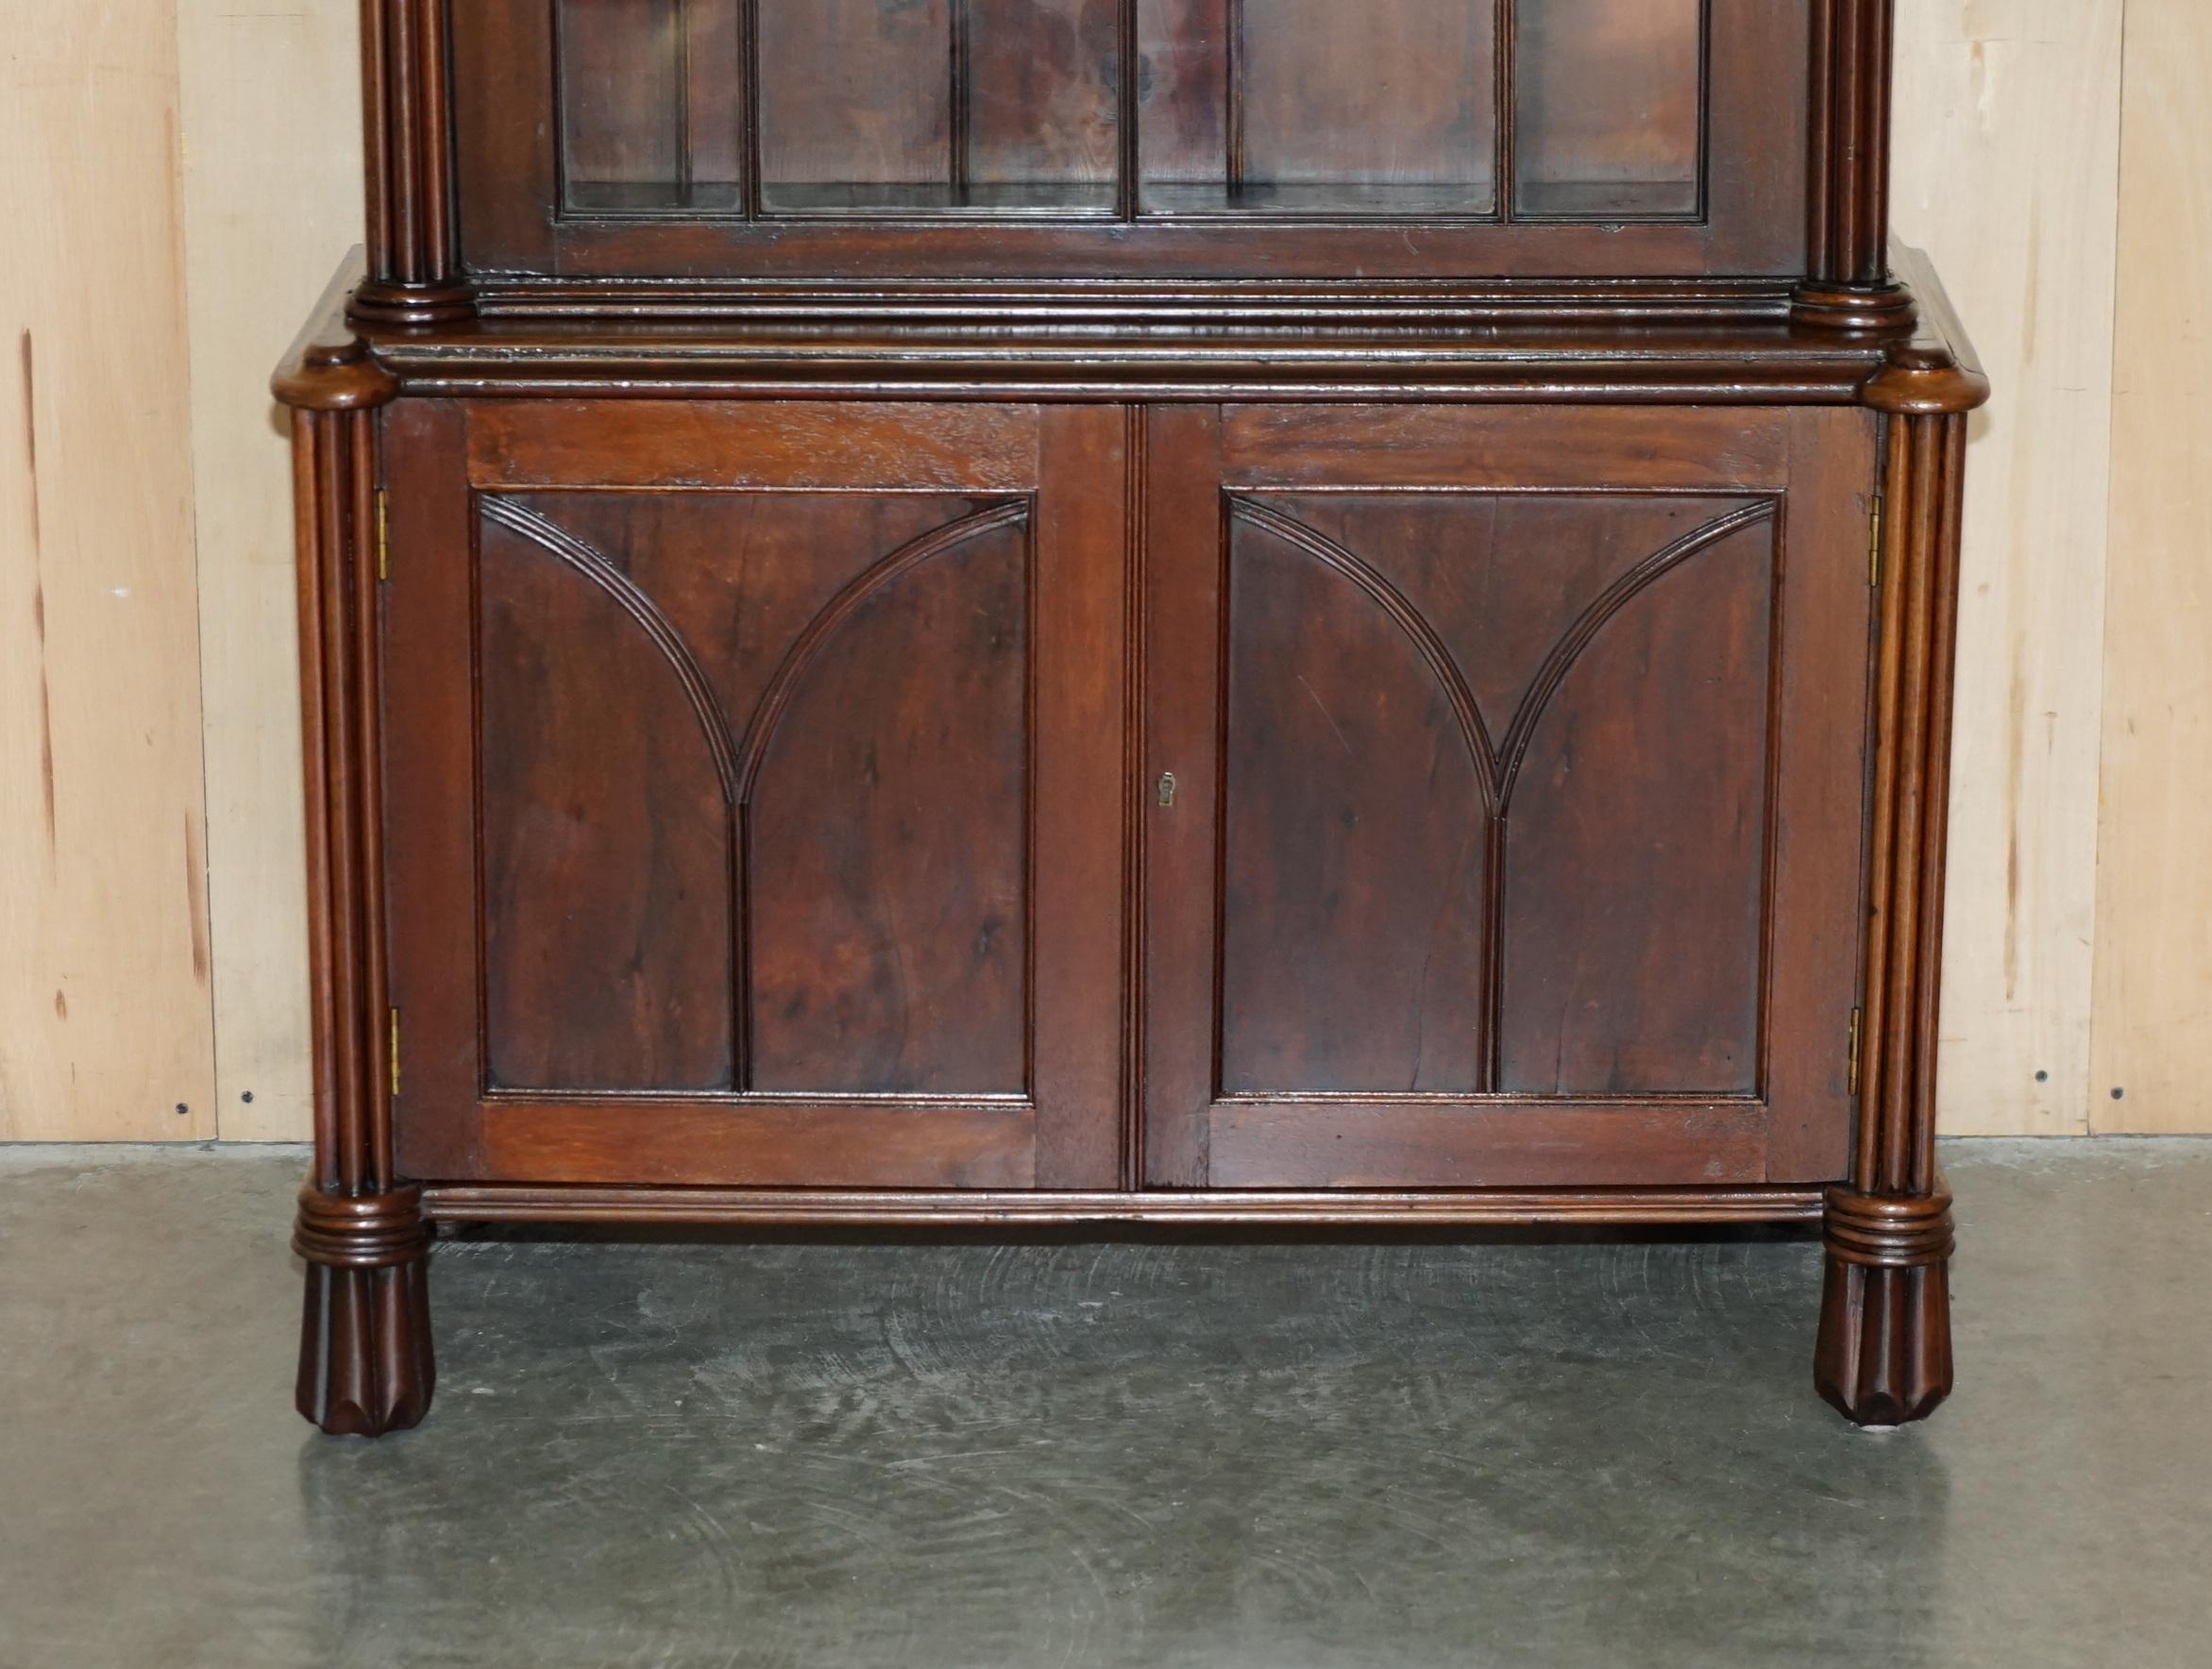 Gothic Revival EARLY VICTORIAN GOTHiC REVIVAL ASTRAL GLAZED LIBRARY BOOKCASE WITH STEEPLE GLASS For Sale